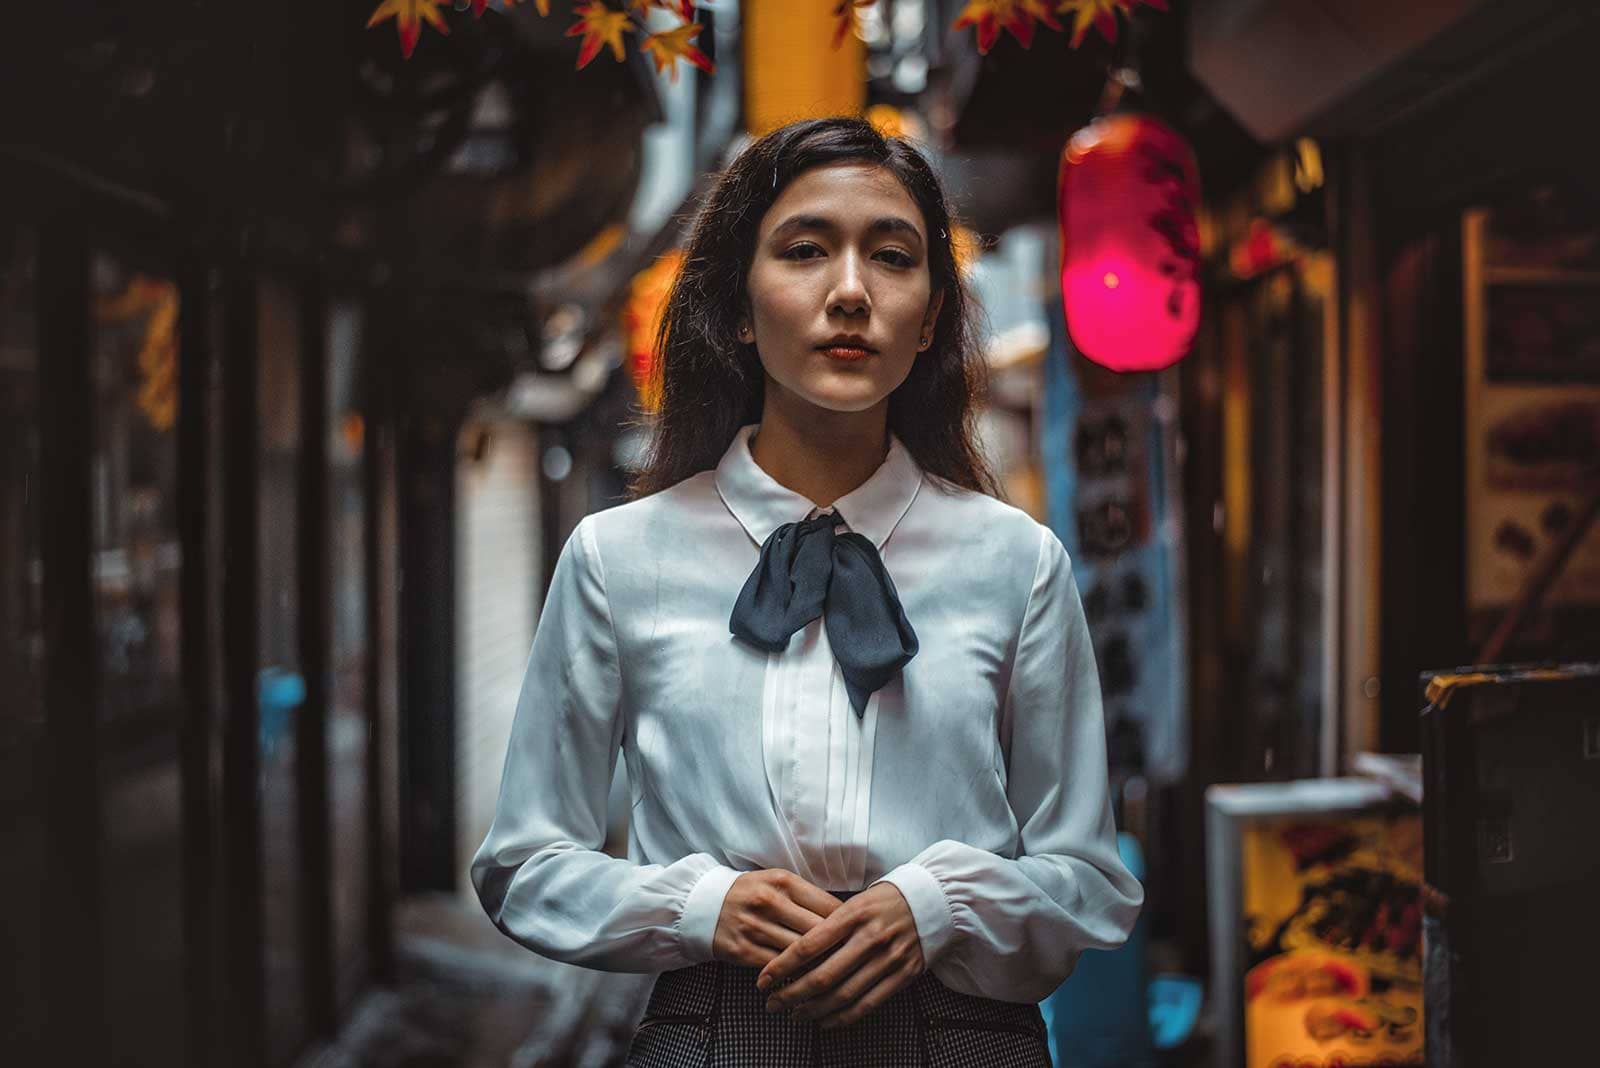 Portrait of a woman in a Japanese town before edit